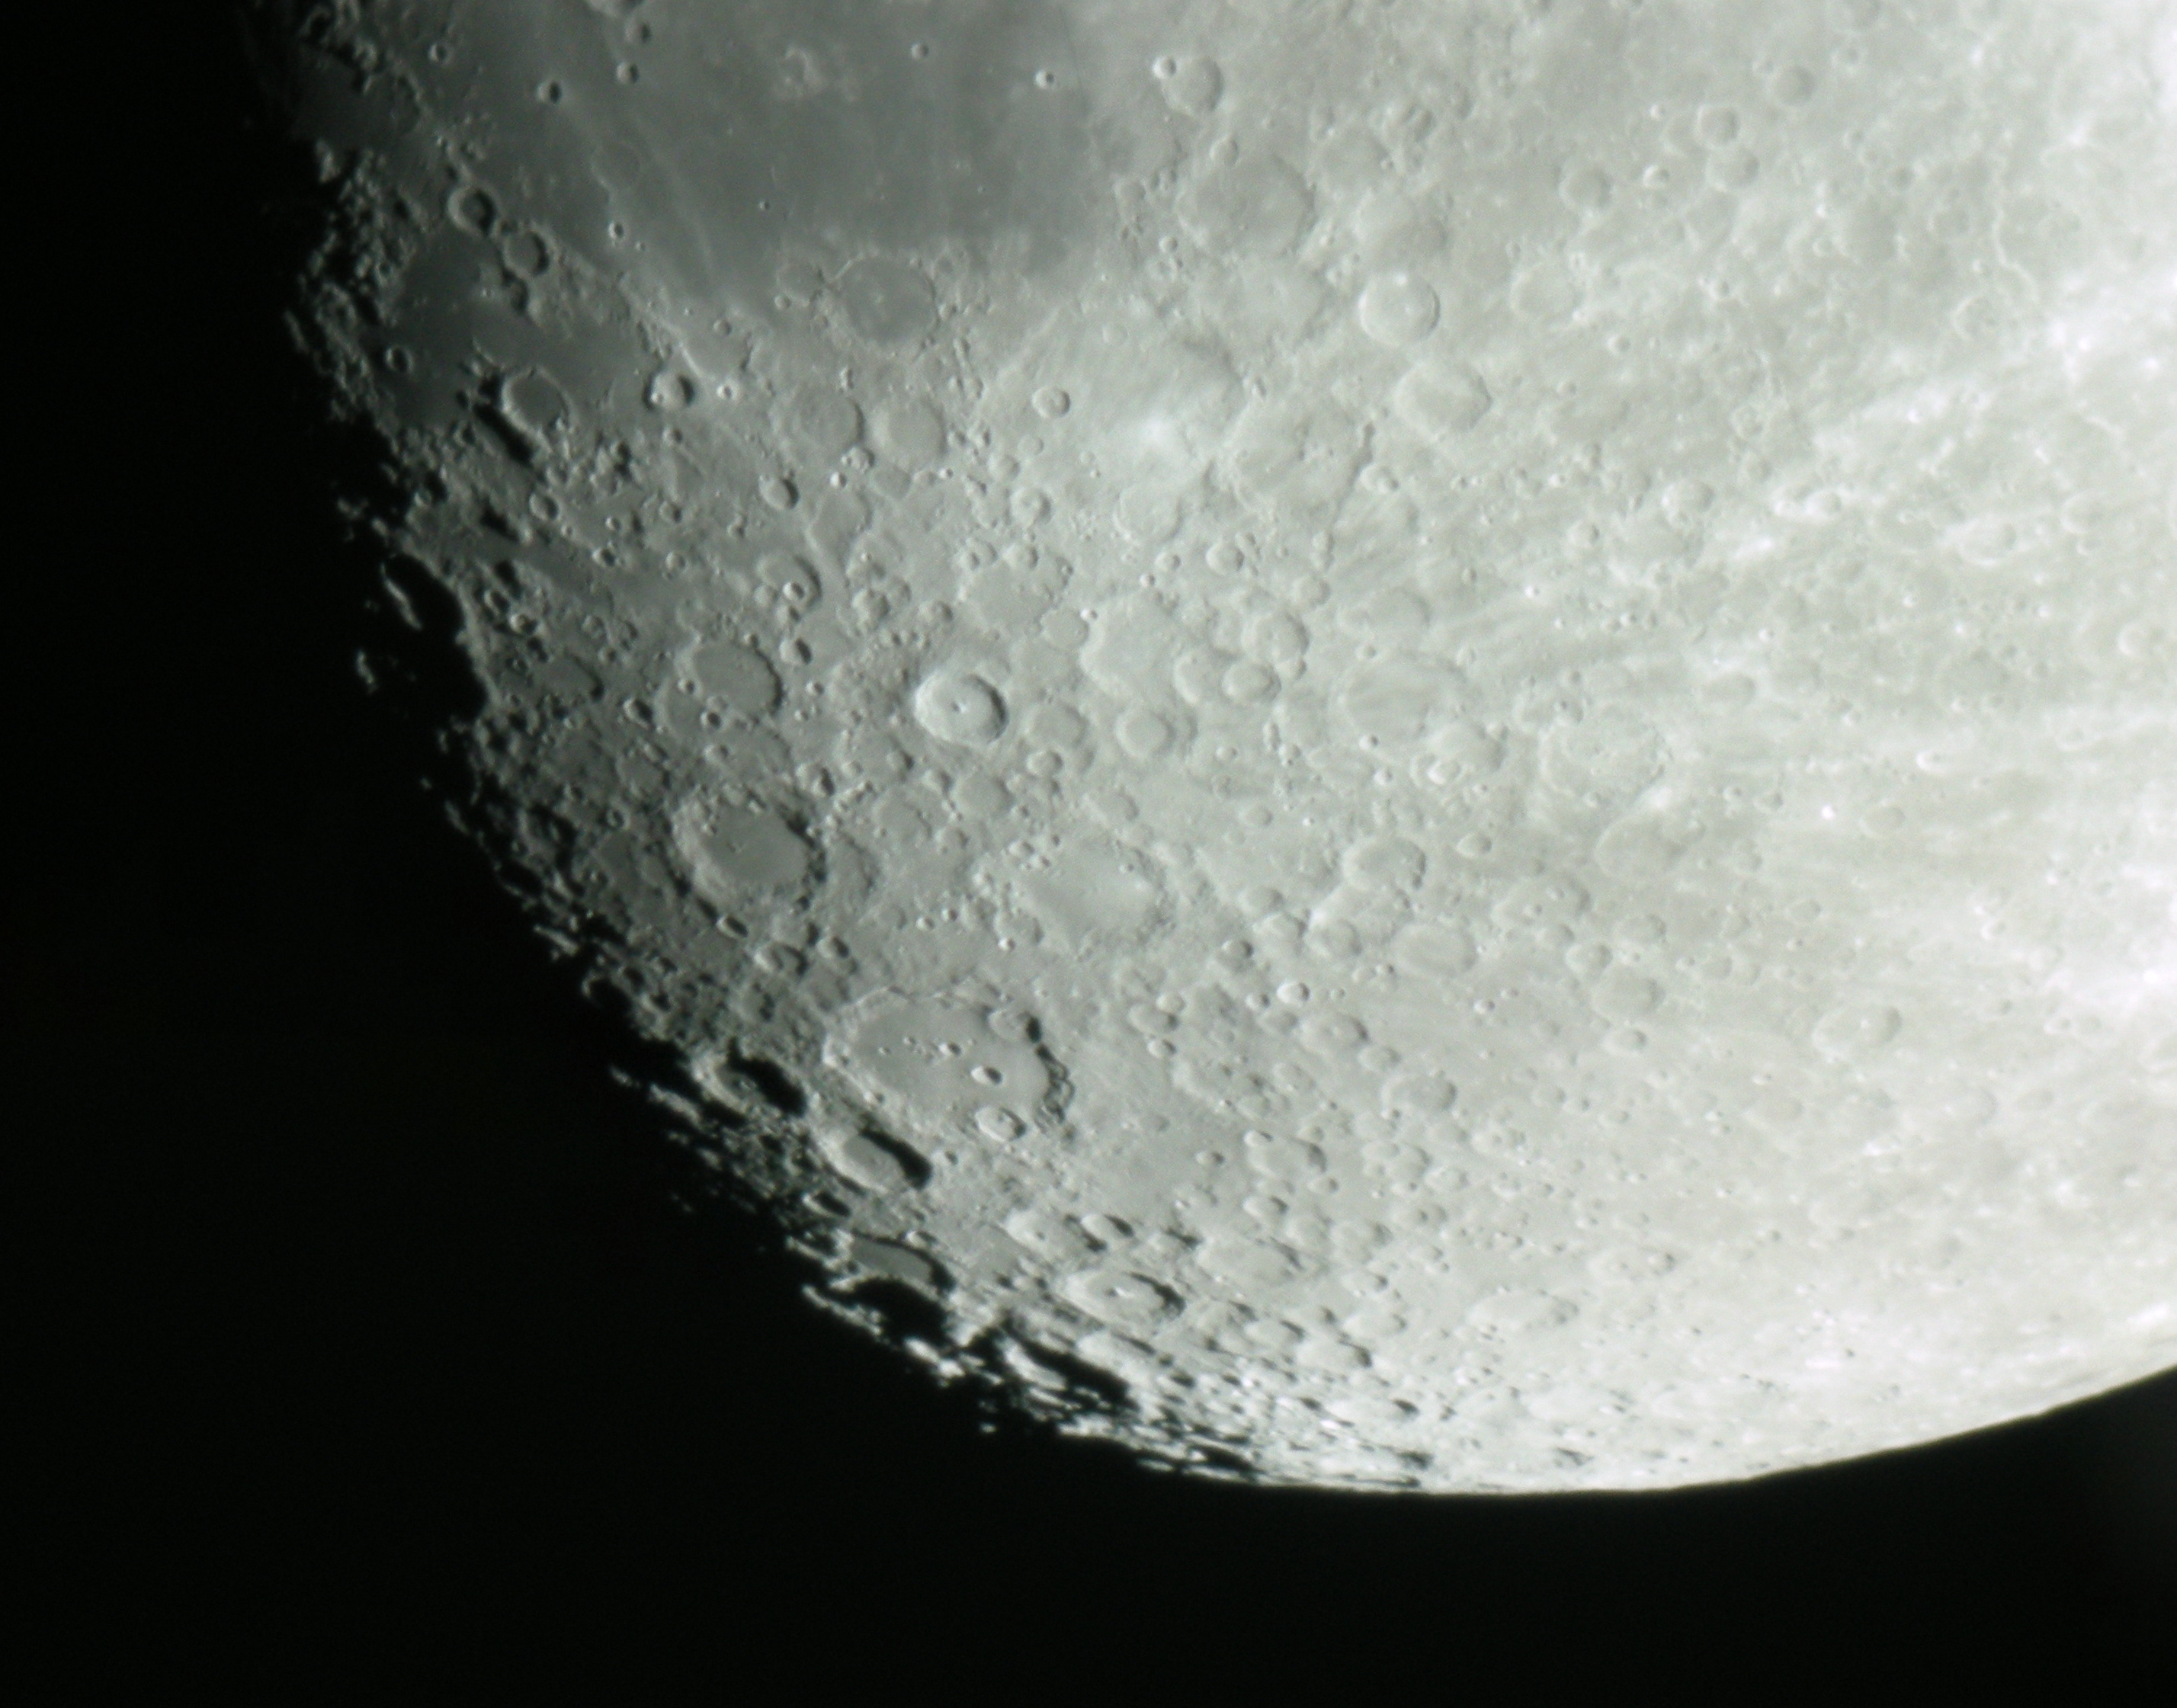 2011-12-05-craters-moon